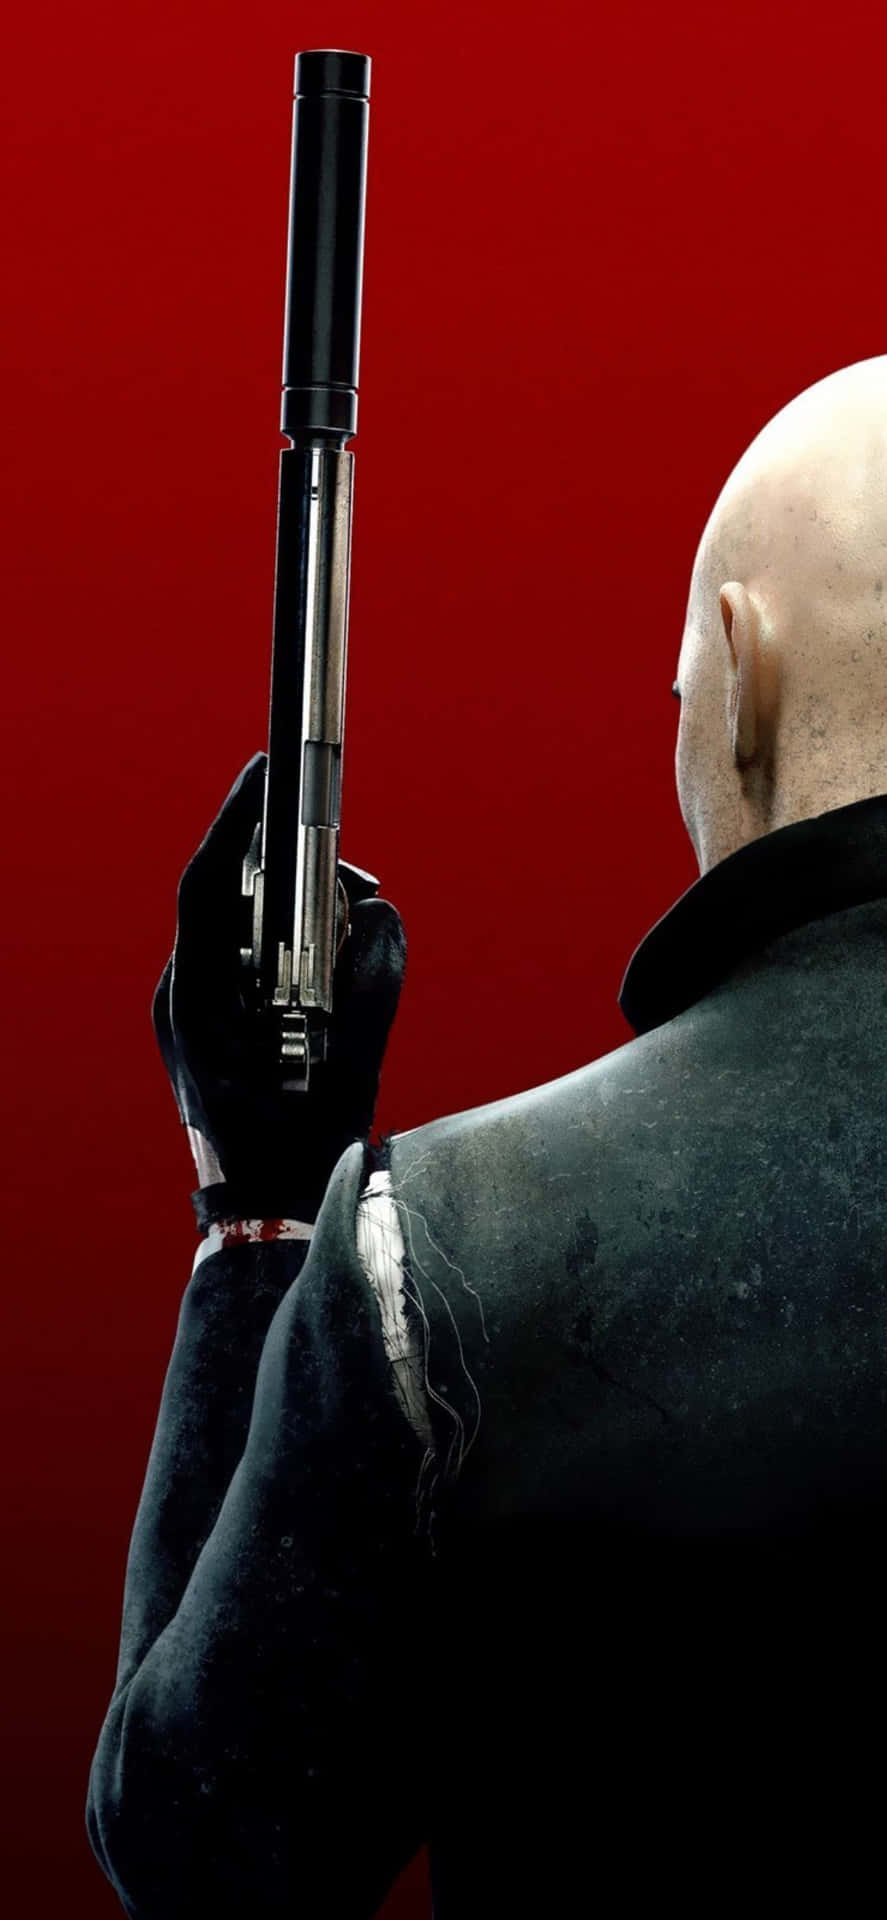 “Adapt your Absolution with Hitman on your iPhone X”